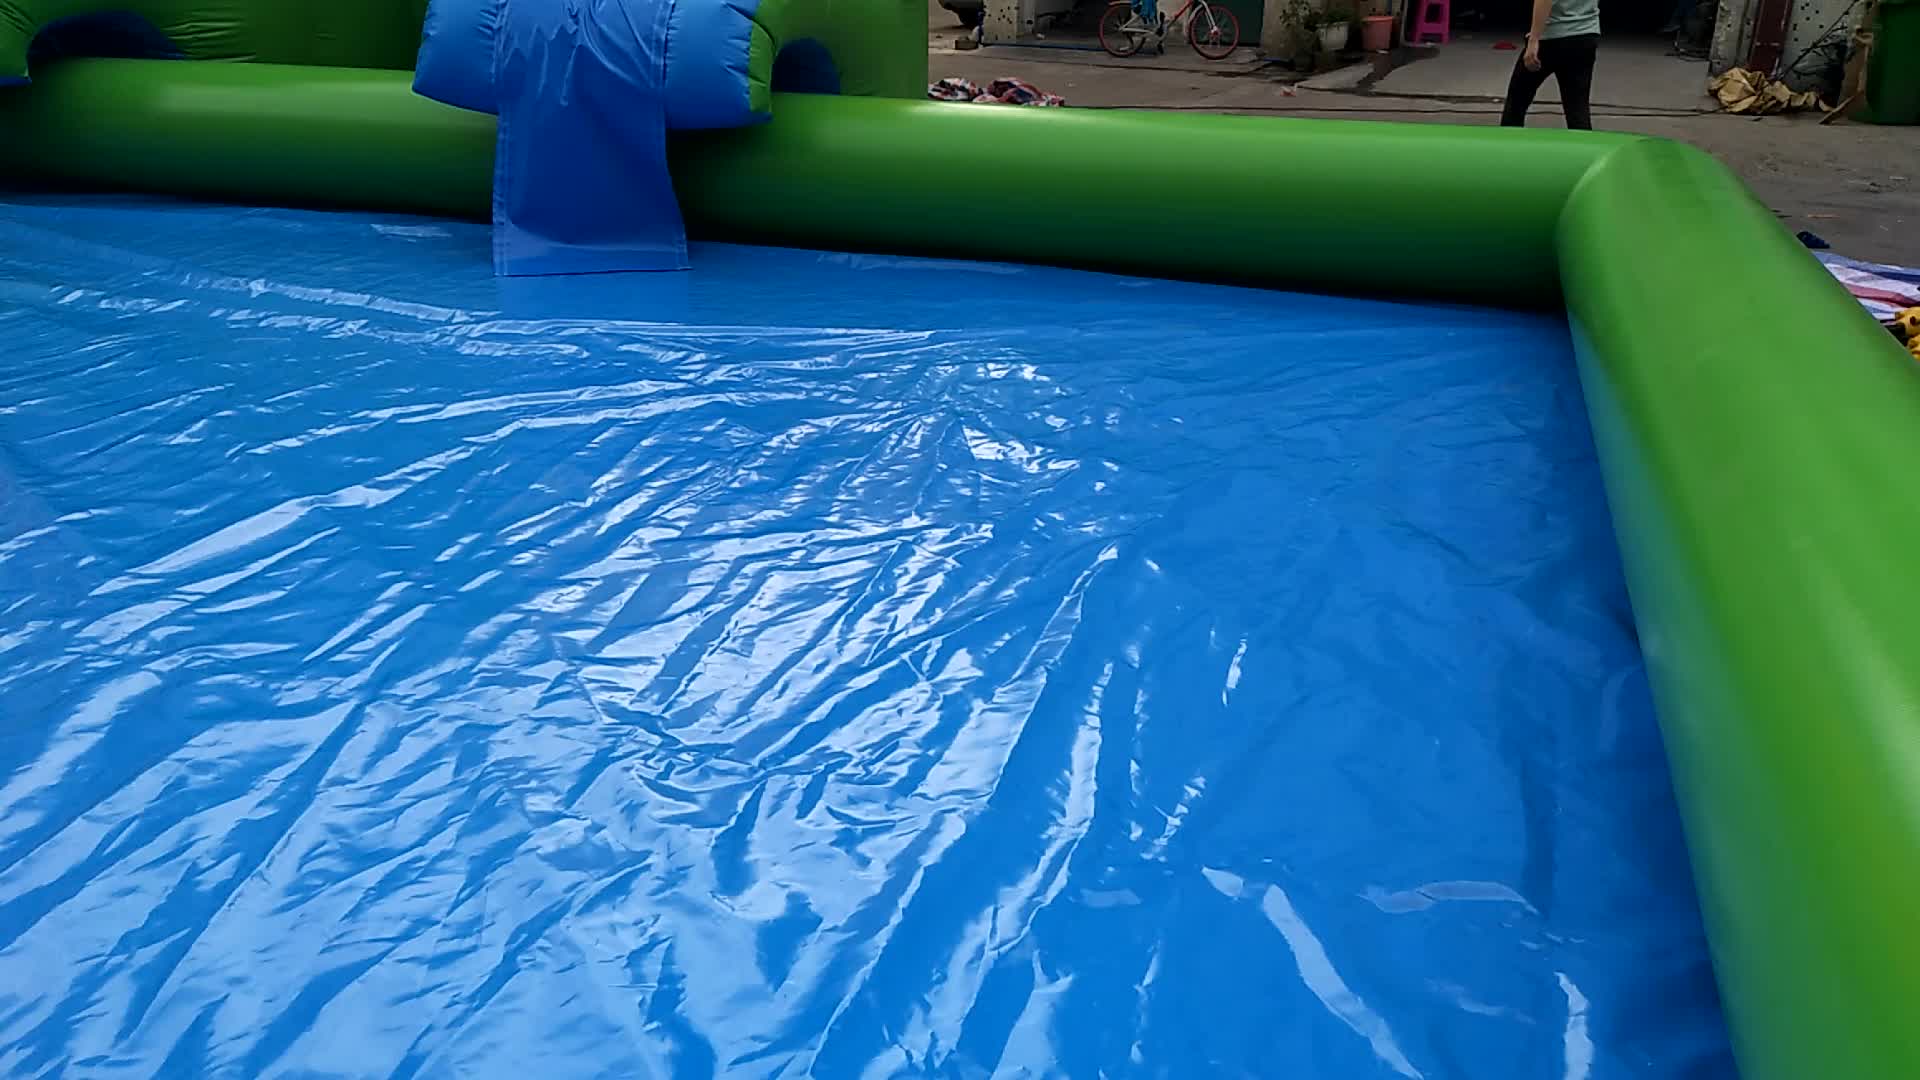 Giant Adult Pool Inflatable Swimming Pools Rental,Swimming ...